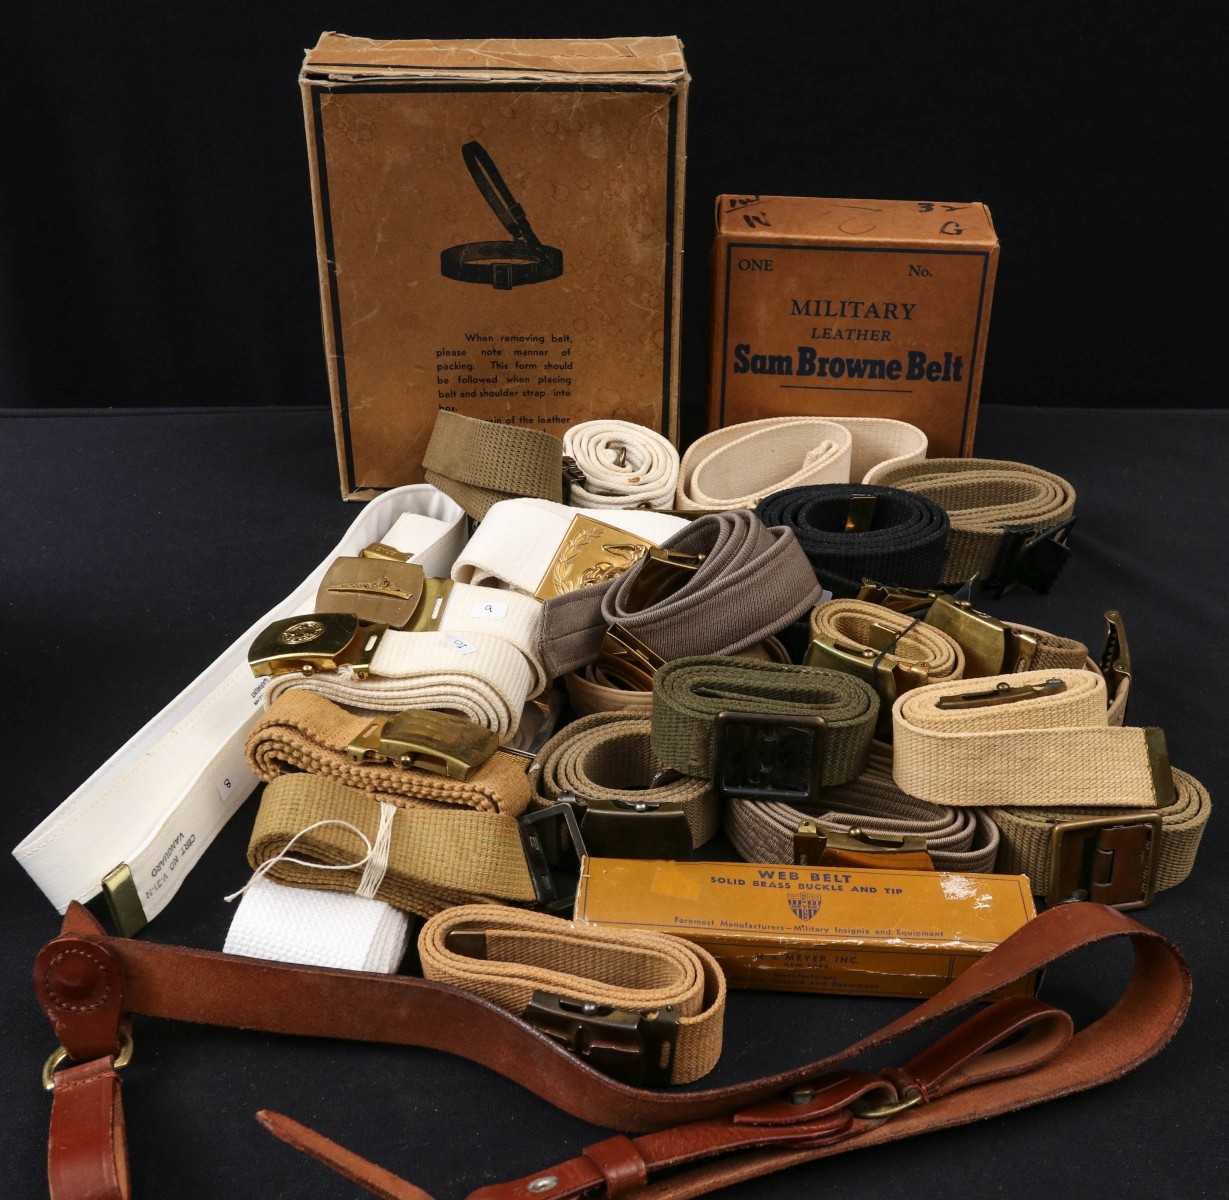 A LARGE COLLECTION OF WWII SAM BROWNE AND OTHER BELTS